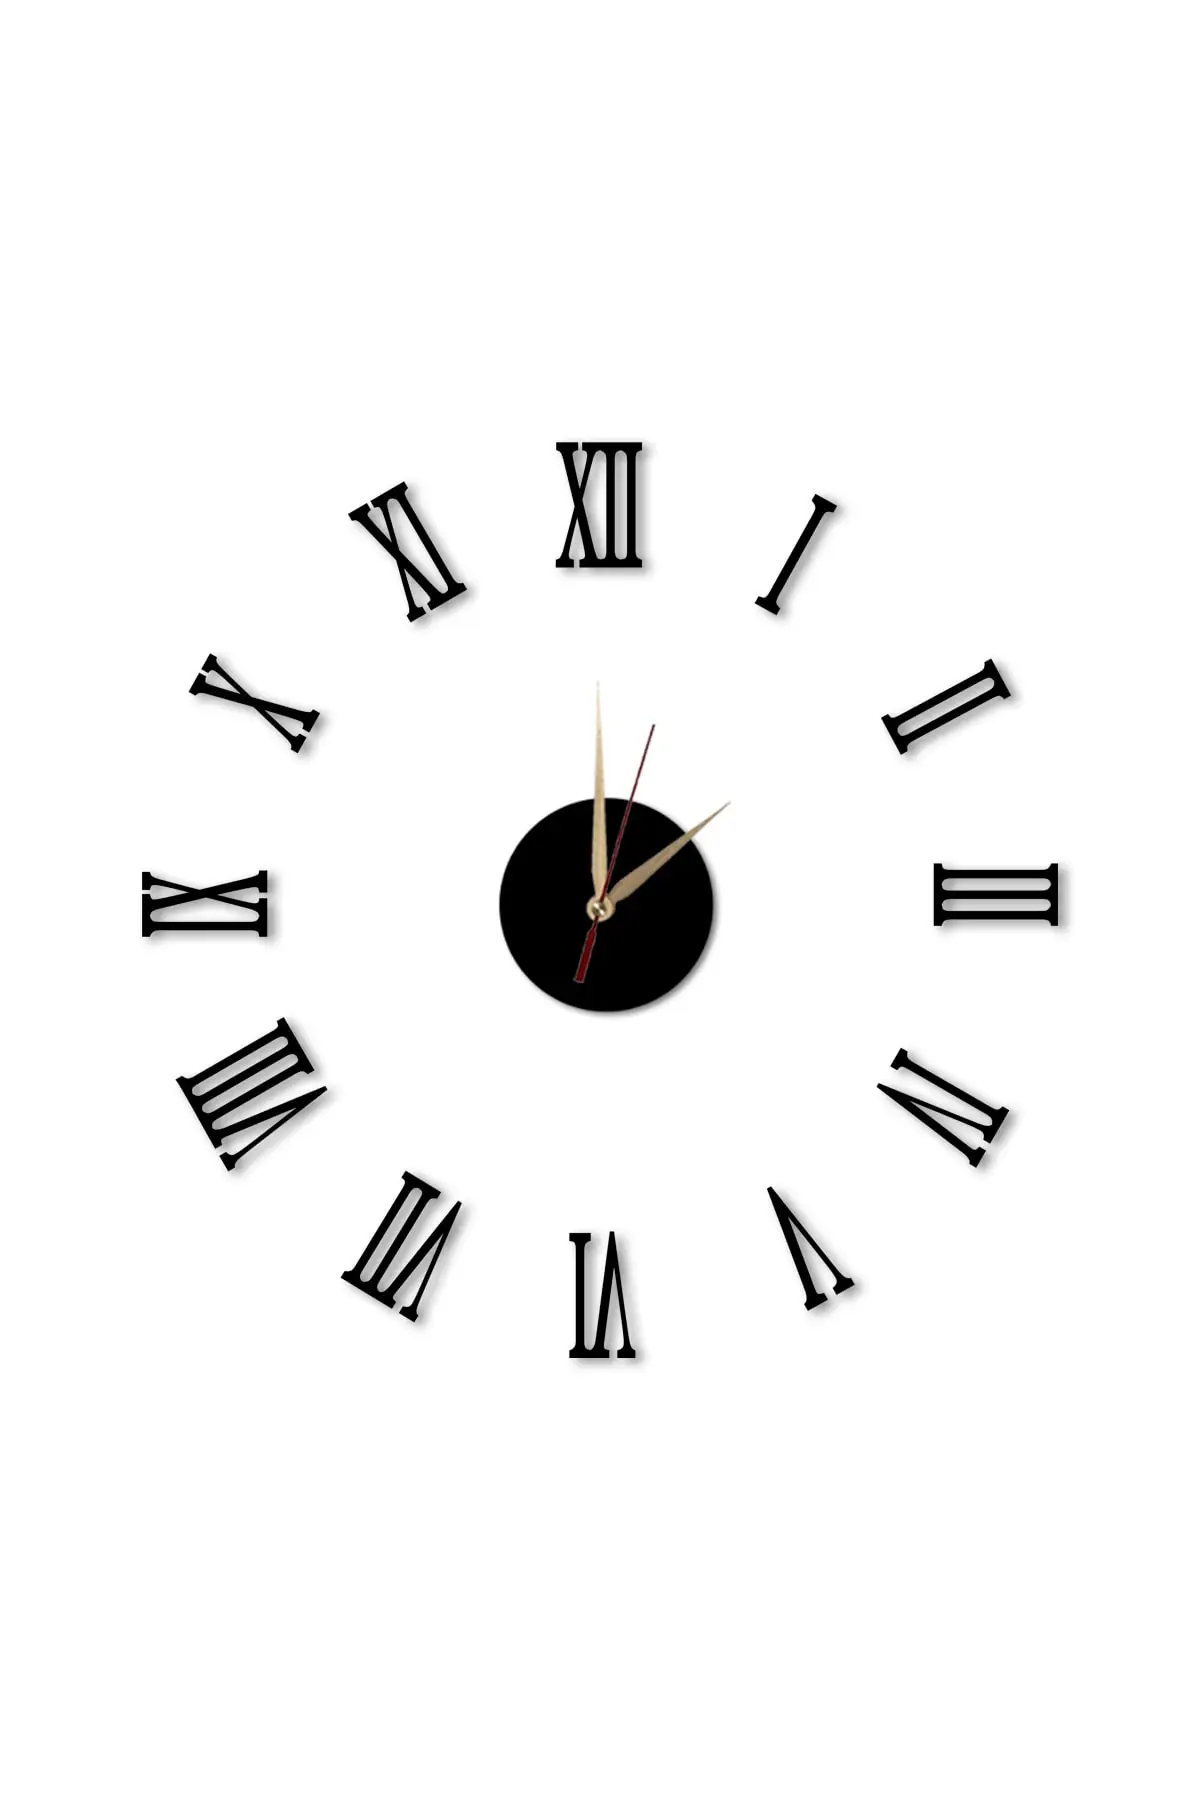 Wooden Decorative Wall Clock Big Size Centennial Roman Numeral Modern Home Decoration Analog Metal Clock Round for Living Room